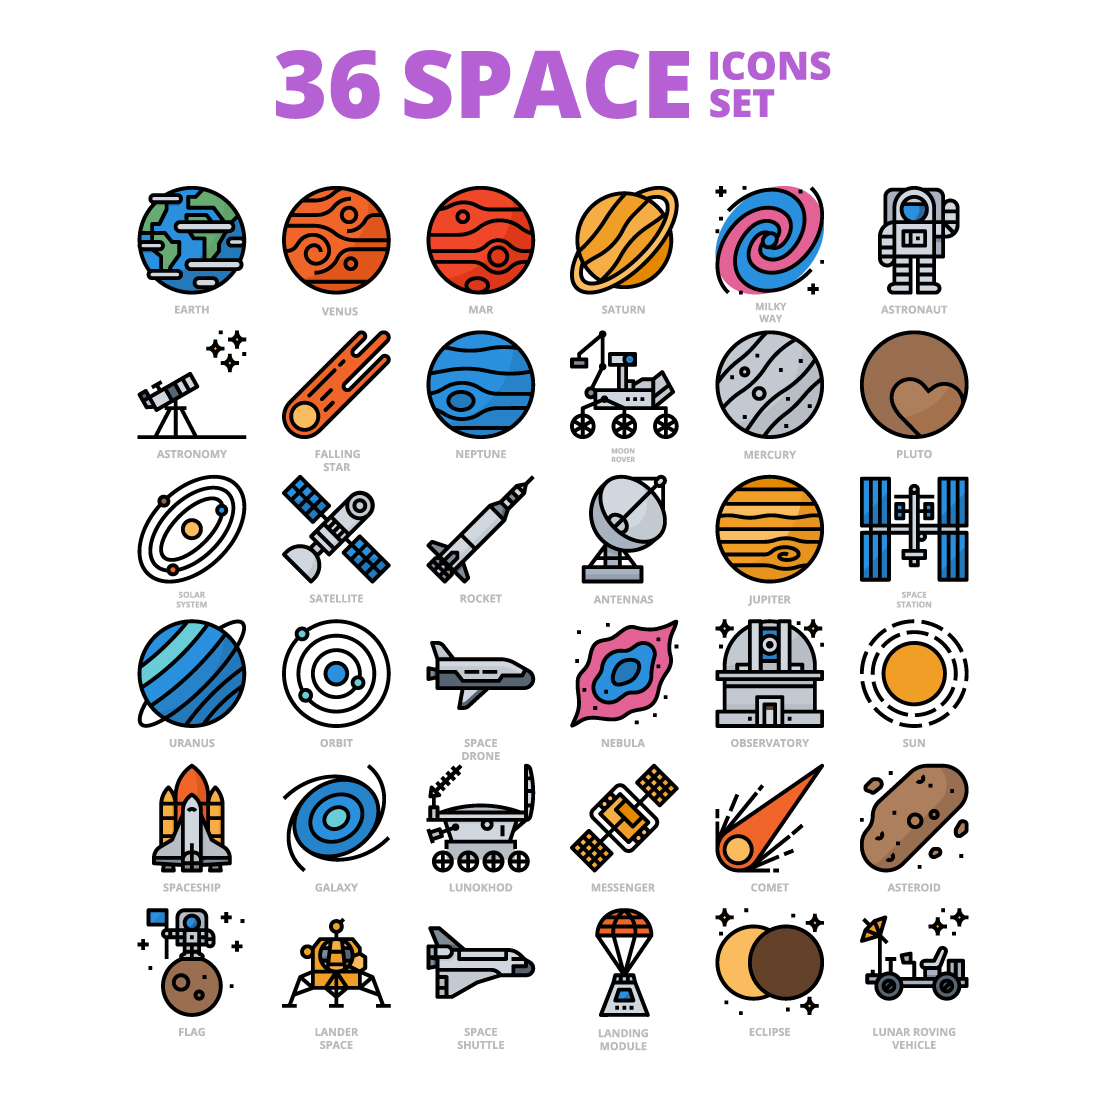 36 Space Icons Set x 4 Styles cover image.